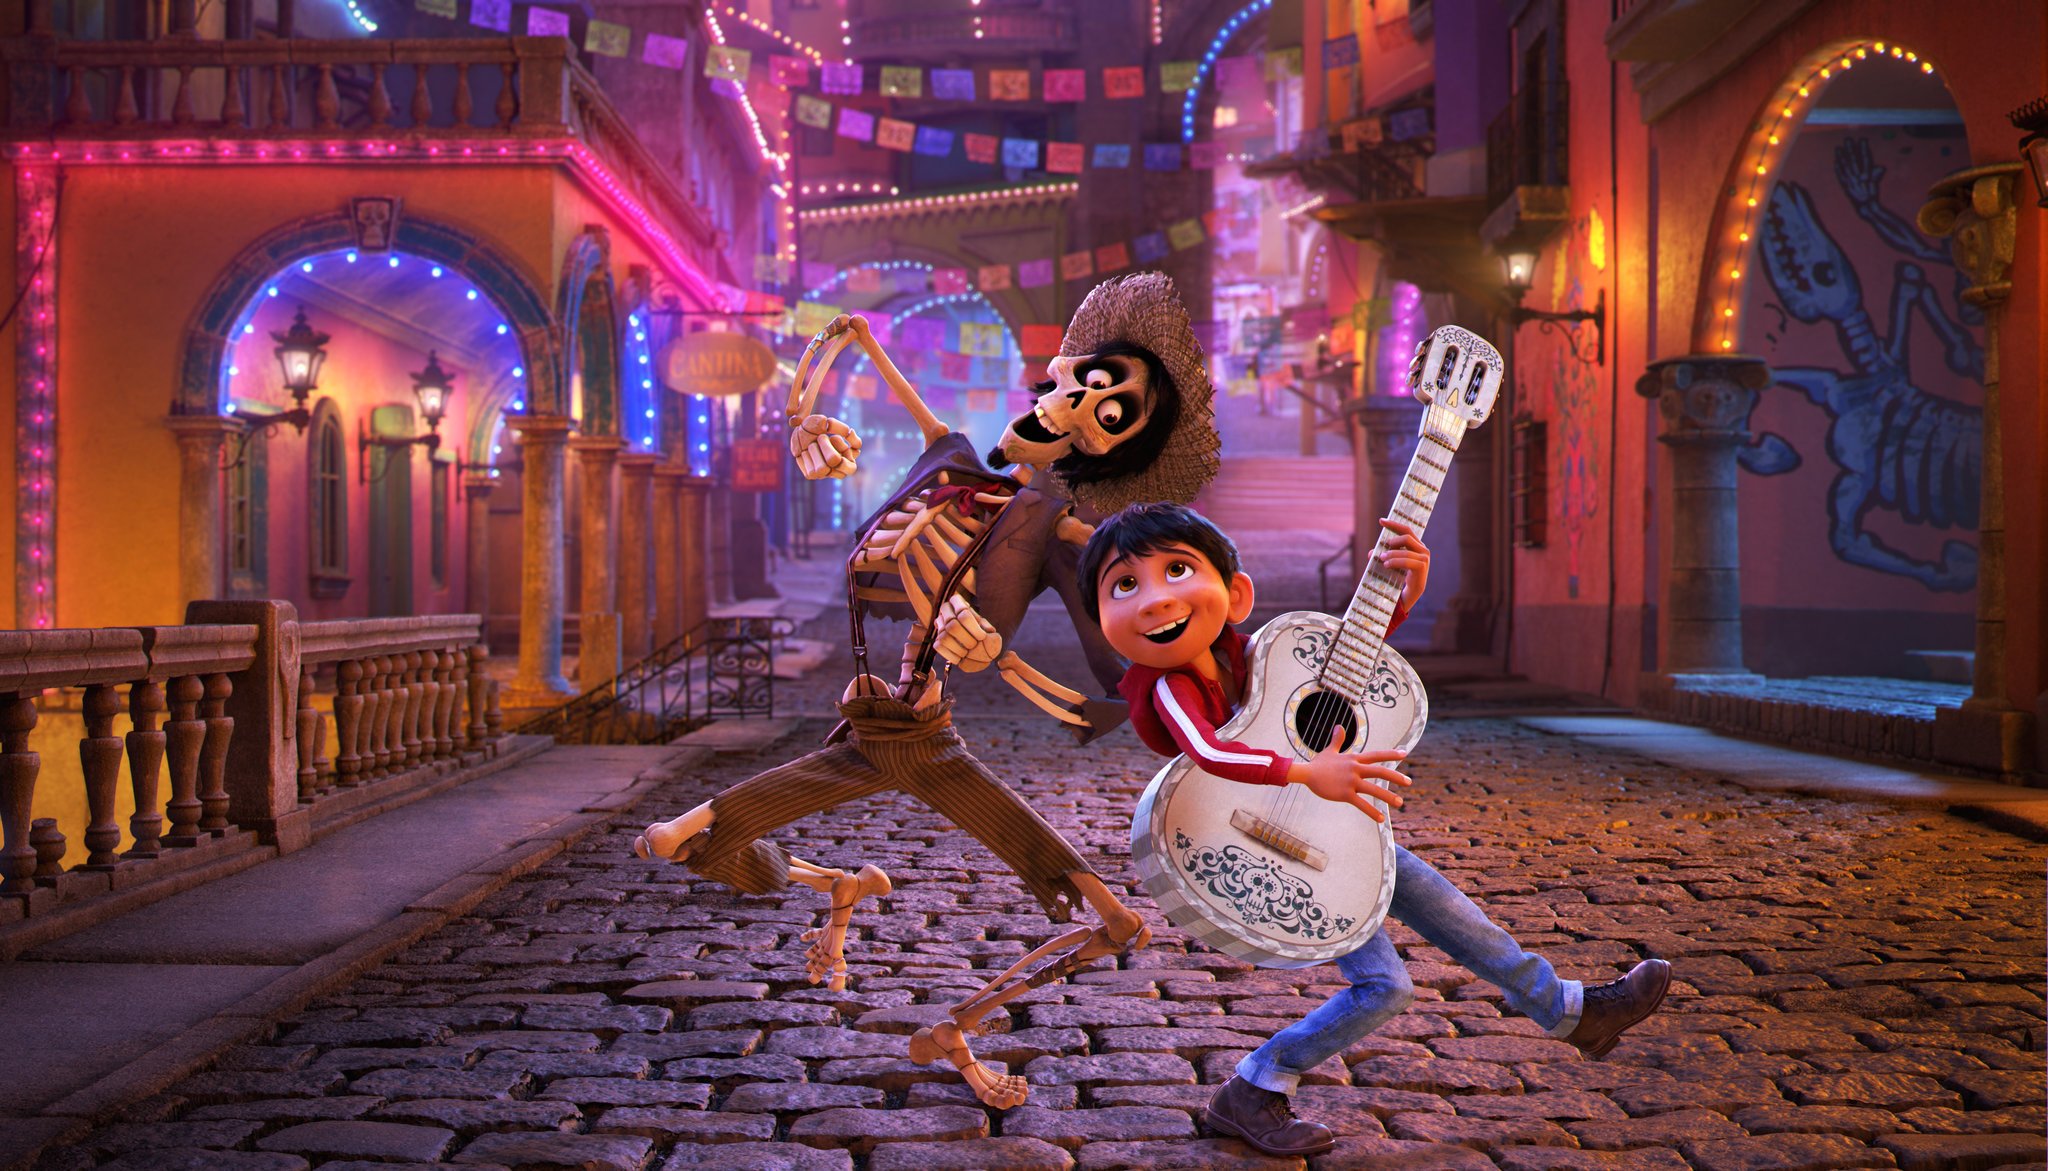 Coco Animated Feature Oscars 2018 predictions